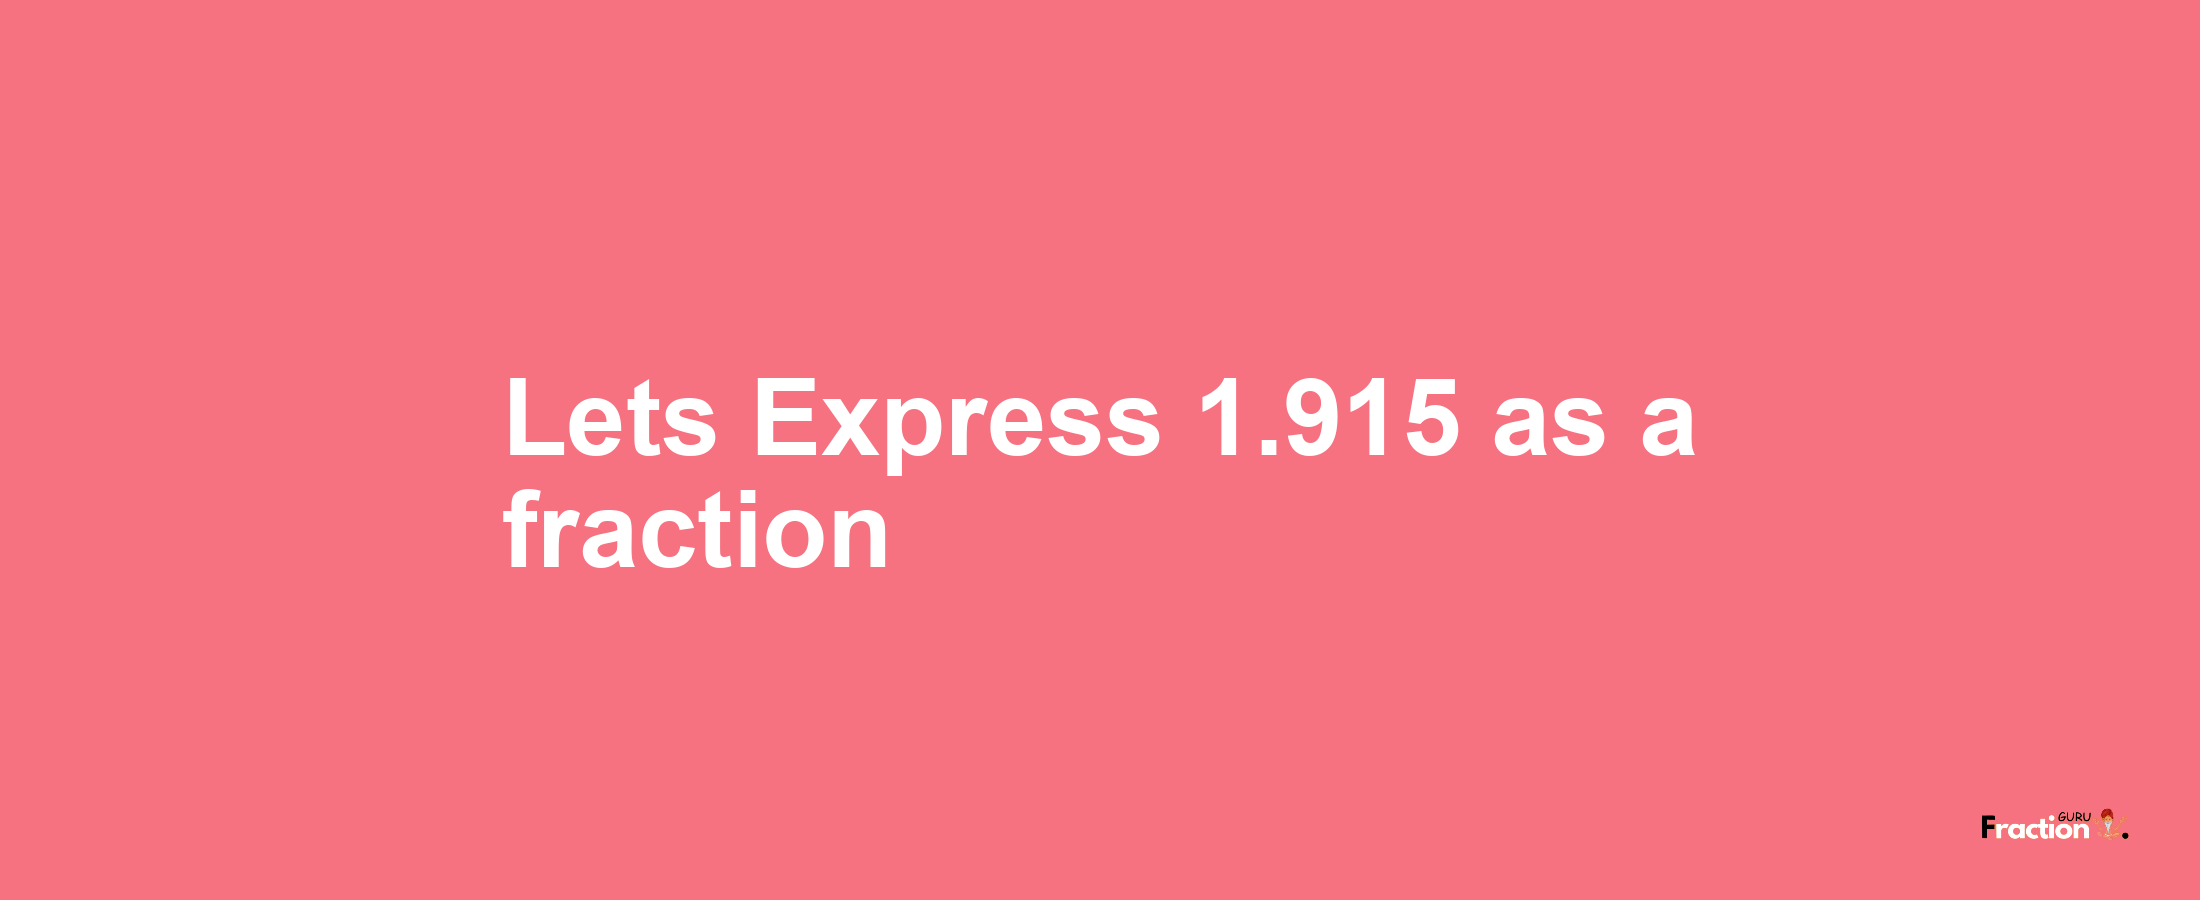 Lets Express 1.915 as afraction